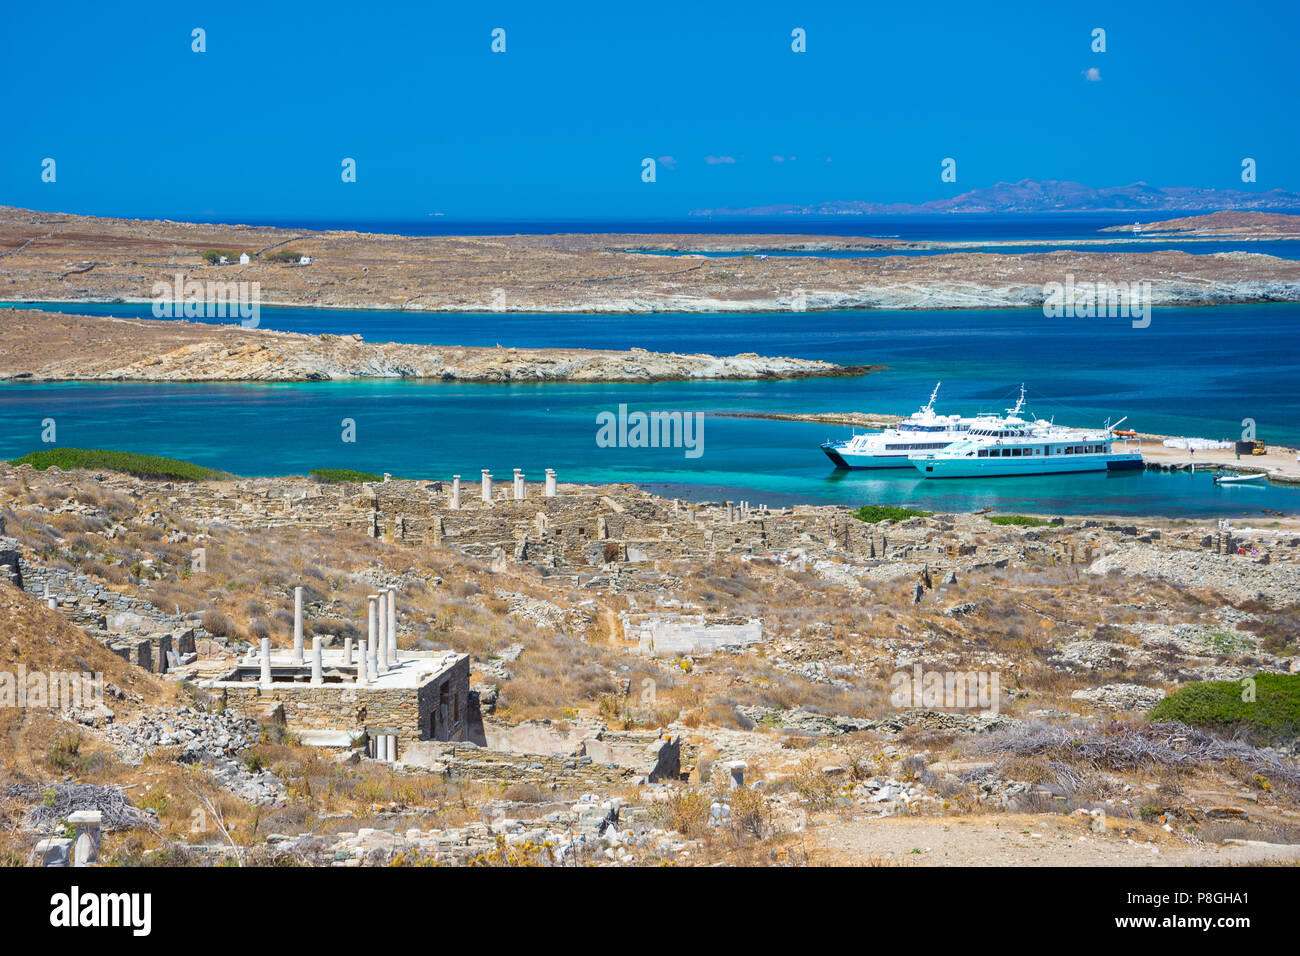 Ancient ruins in the island of Delos in Cyclades, one of the most important mythological, historical and archaeological sites in Greece. Stock Photo